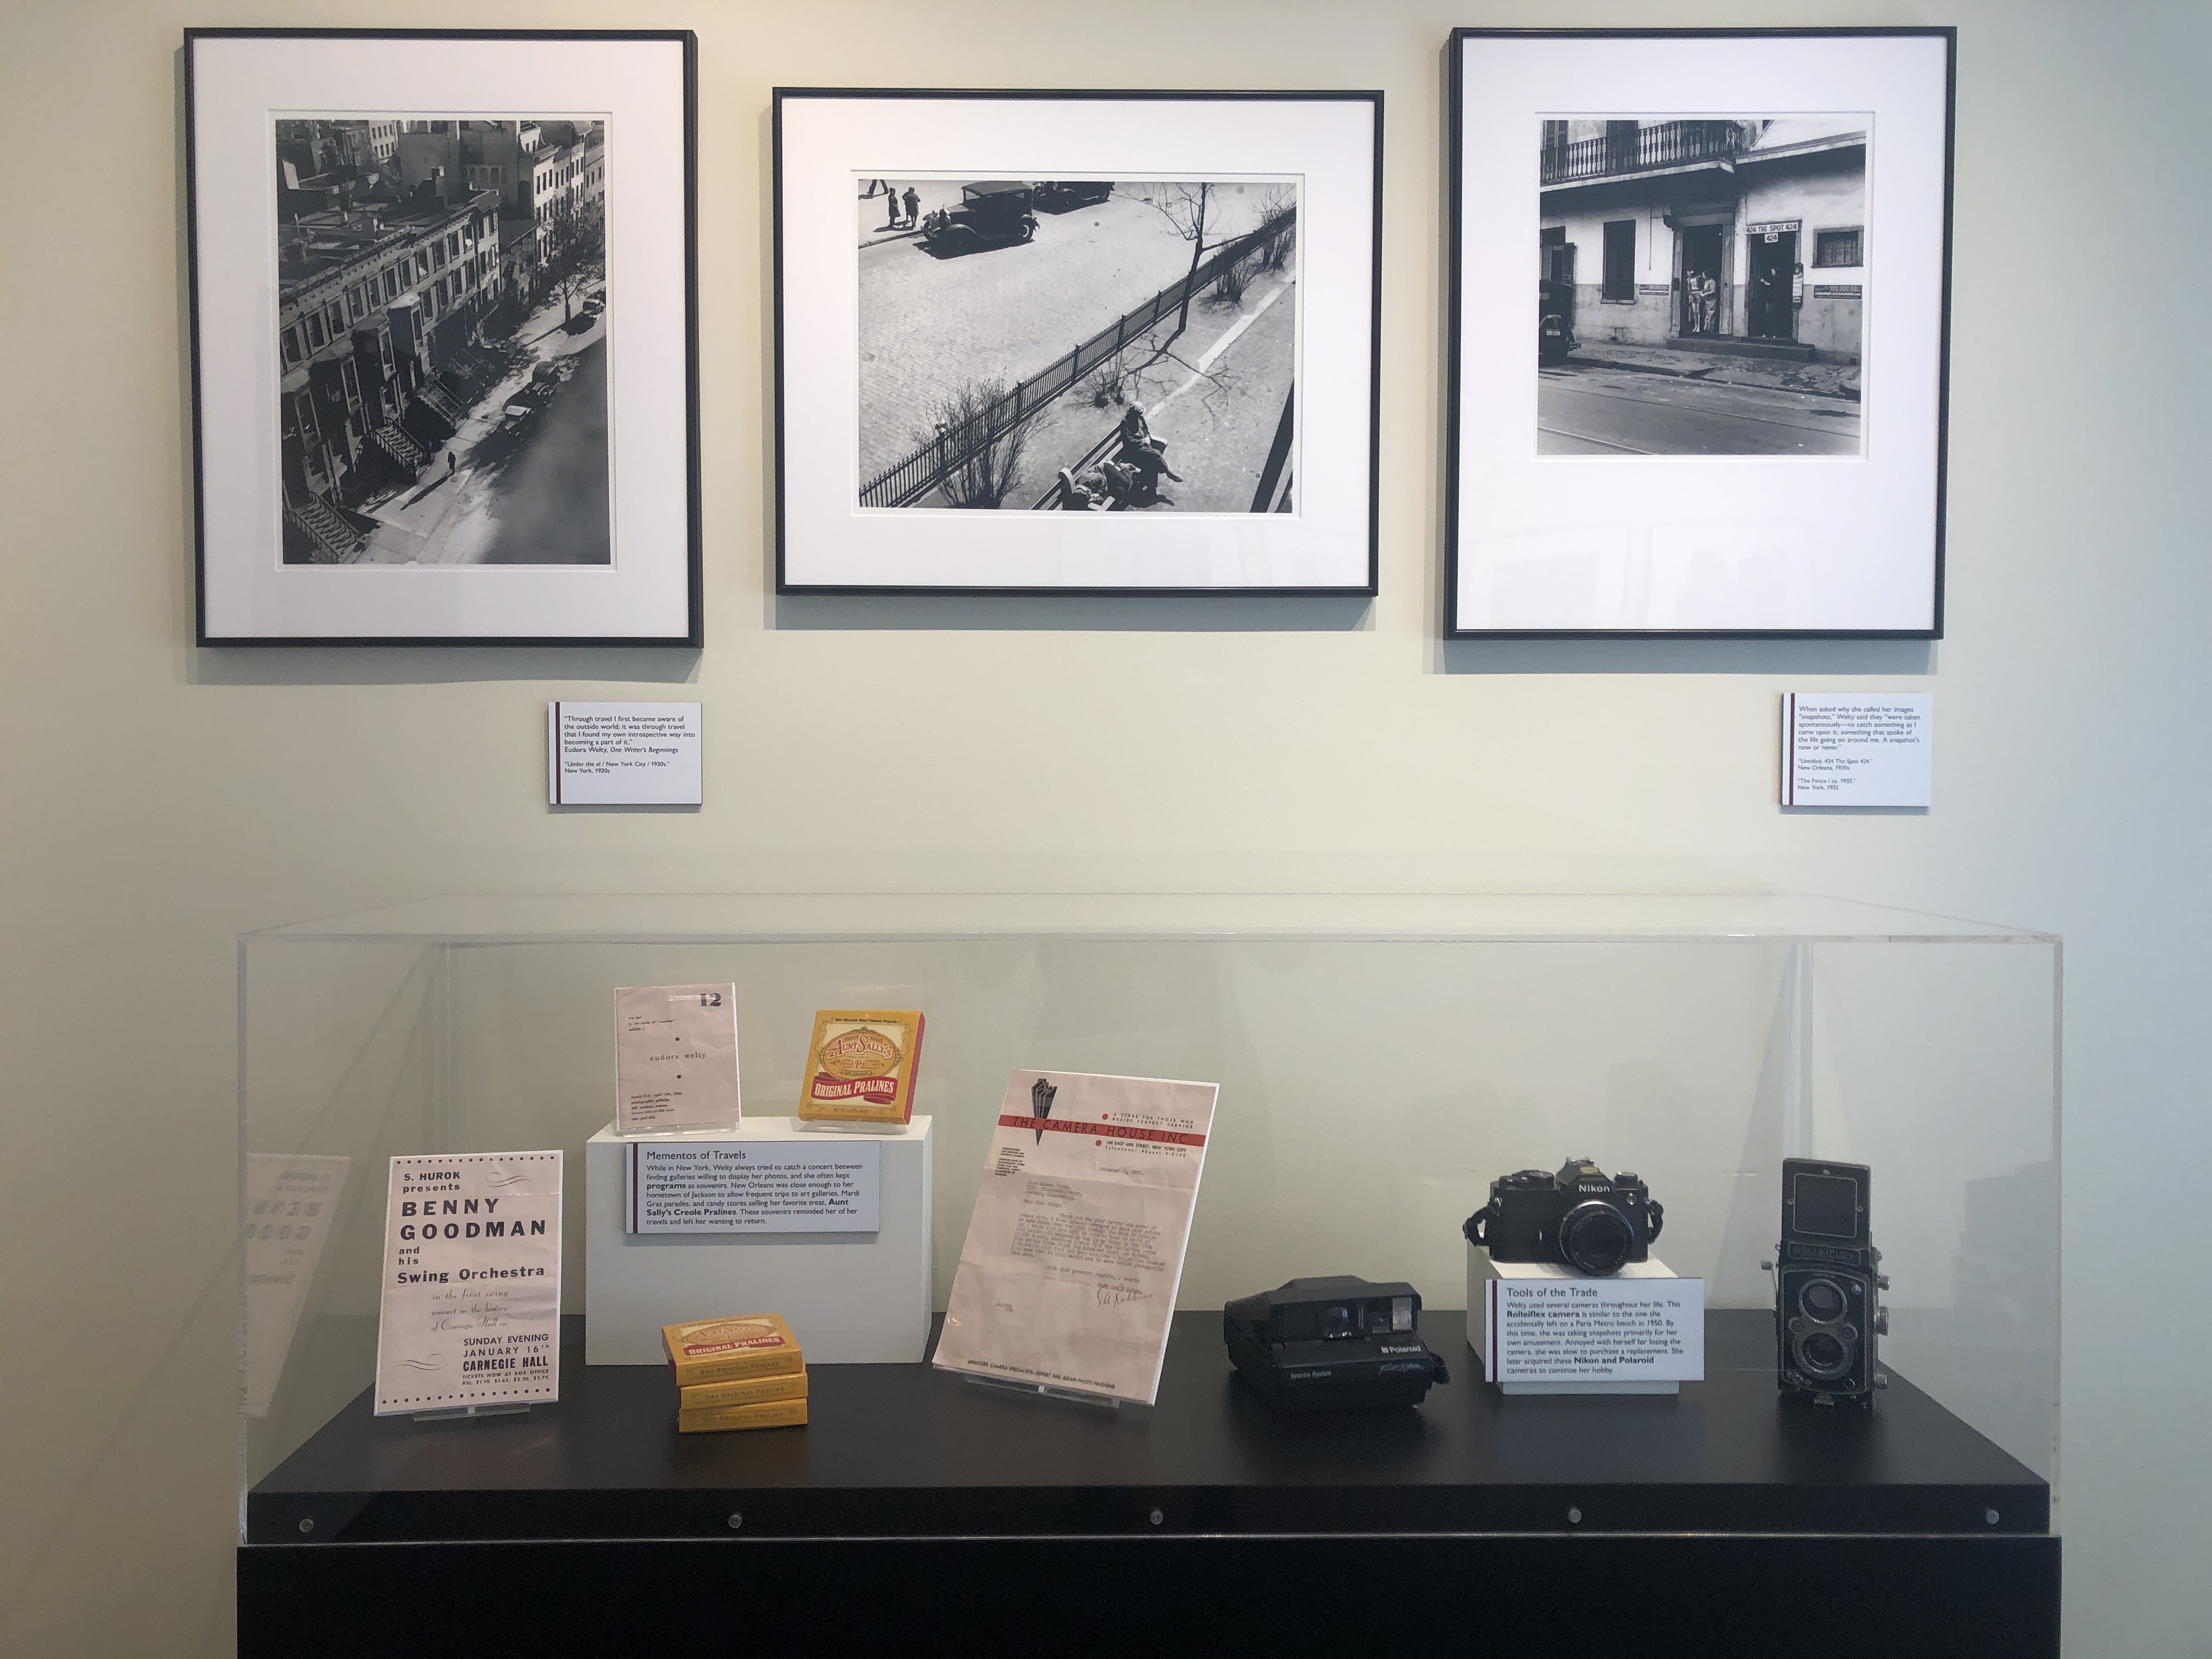 Three black-and-white photographs by Eudora Welty hang in black frames above an acrylic case displaying cameras and photography-related artifacts from the Eudora Welty: Other Places exhibit